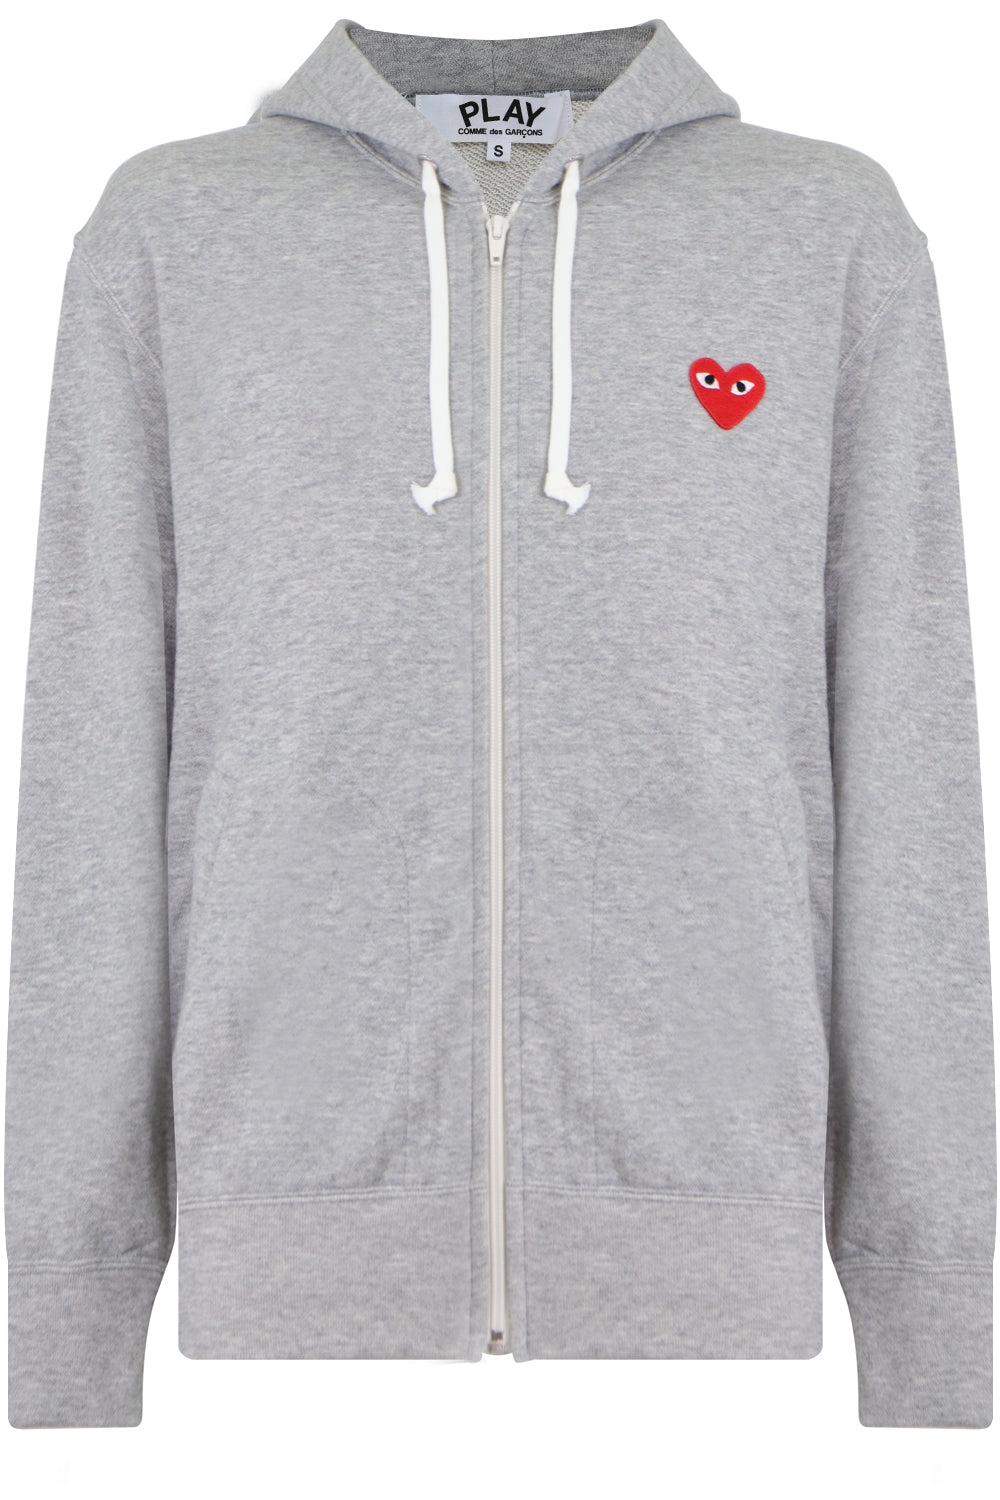 COMME DES GARCONS PLAY RTW PLAY MENS SINGLE HEART ZIP HOODY | LIGHT GREY/RED HEART